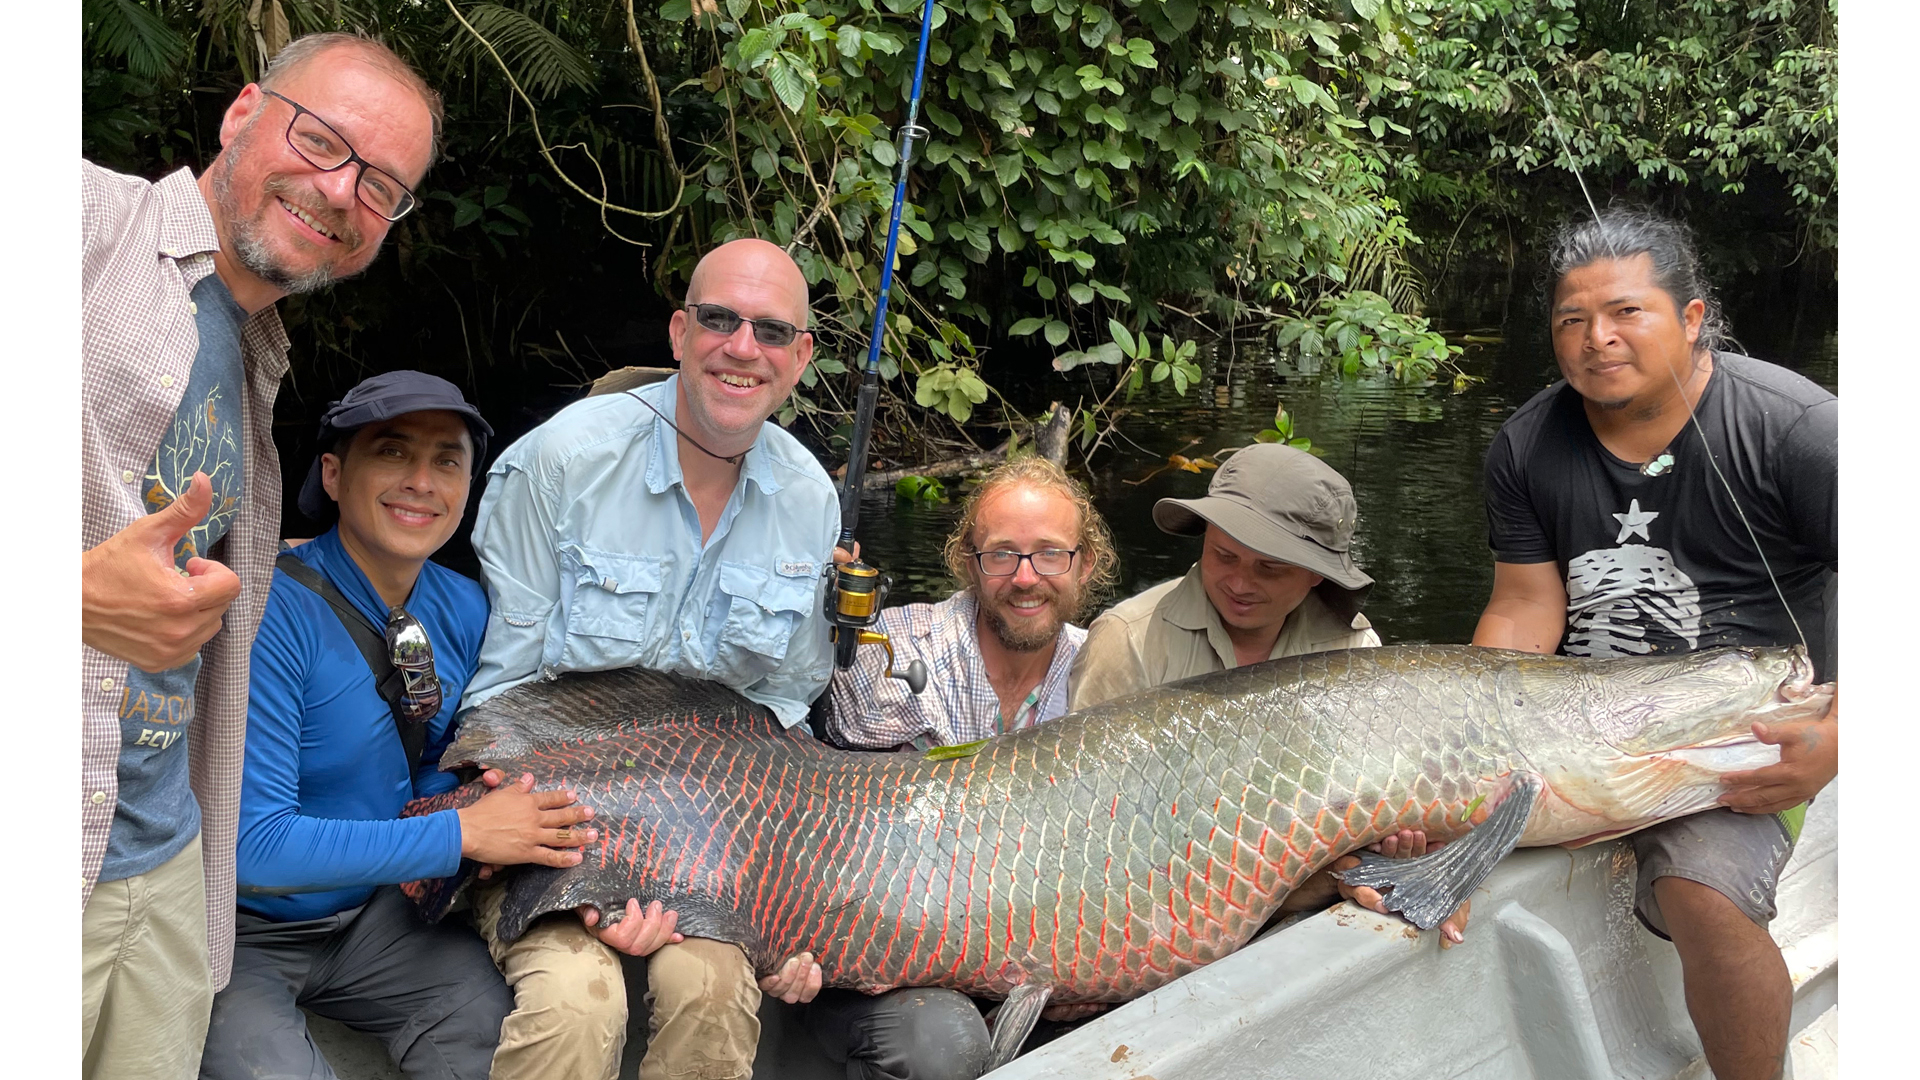 The crew is all smiles as they display their big catch—a two-metre, 200-pound Arapaima. 